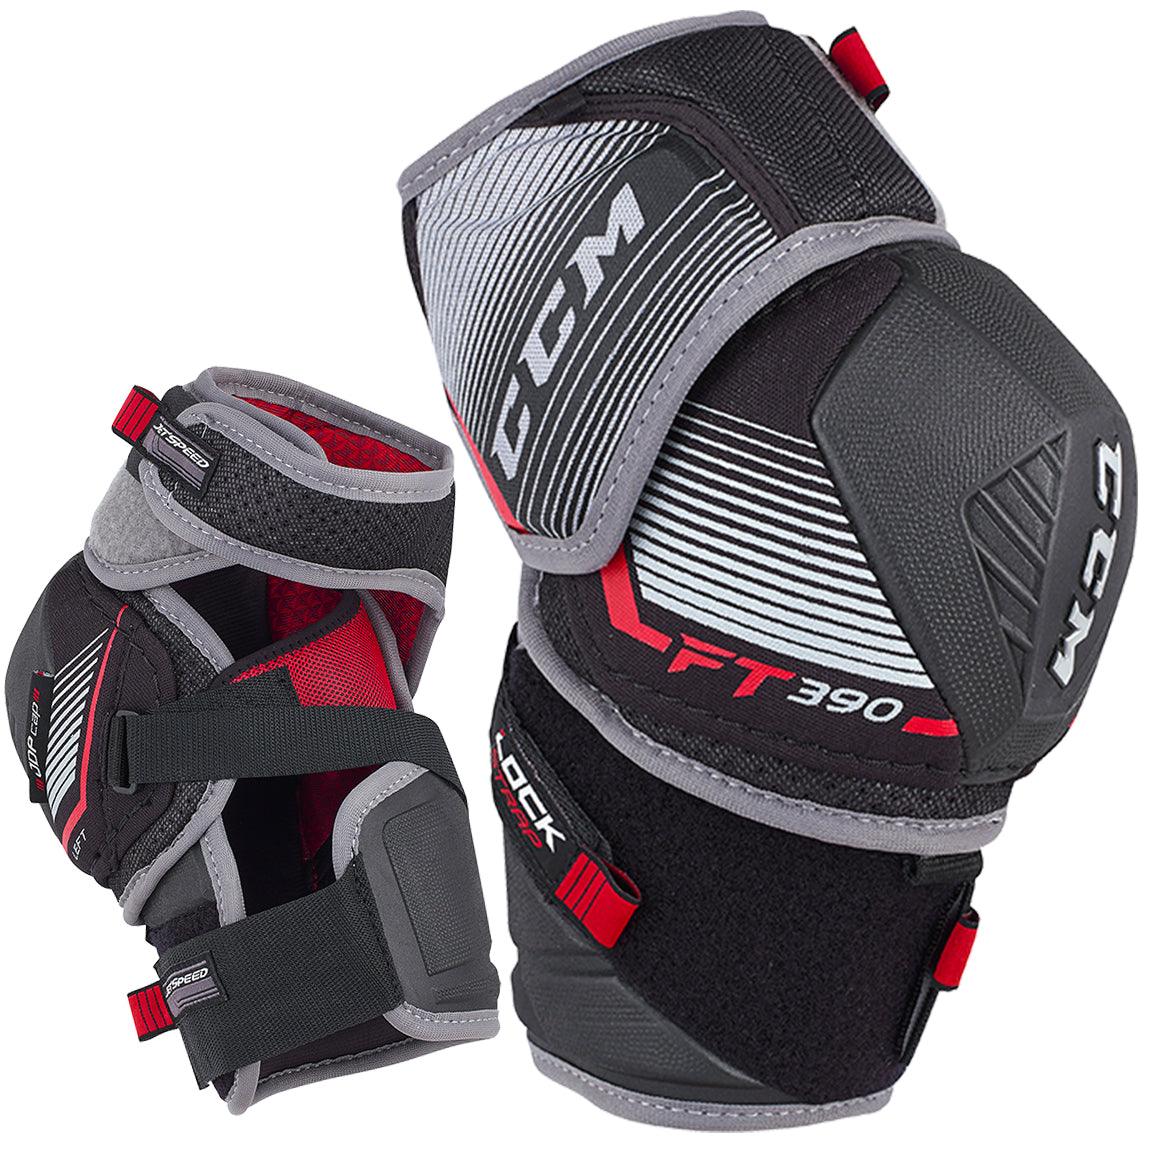 JetSpeed FT390 Elbow Pads - Junior - Sports Excellence